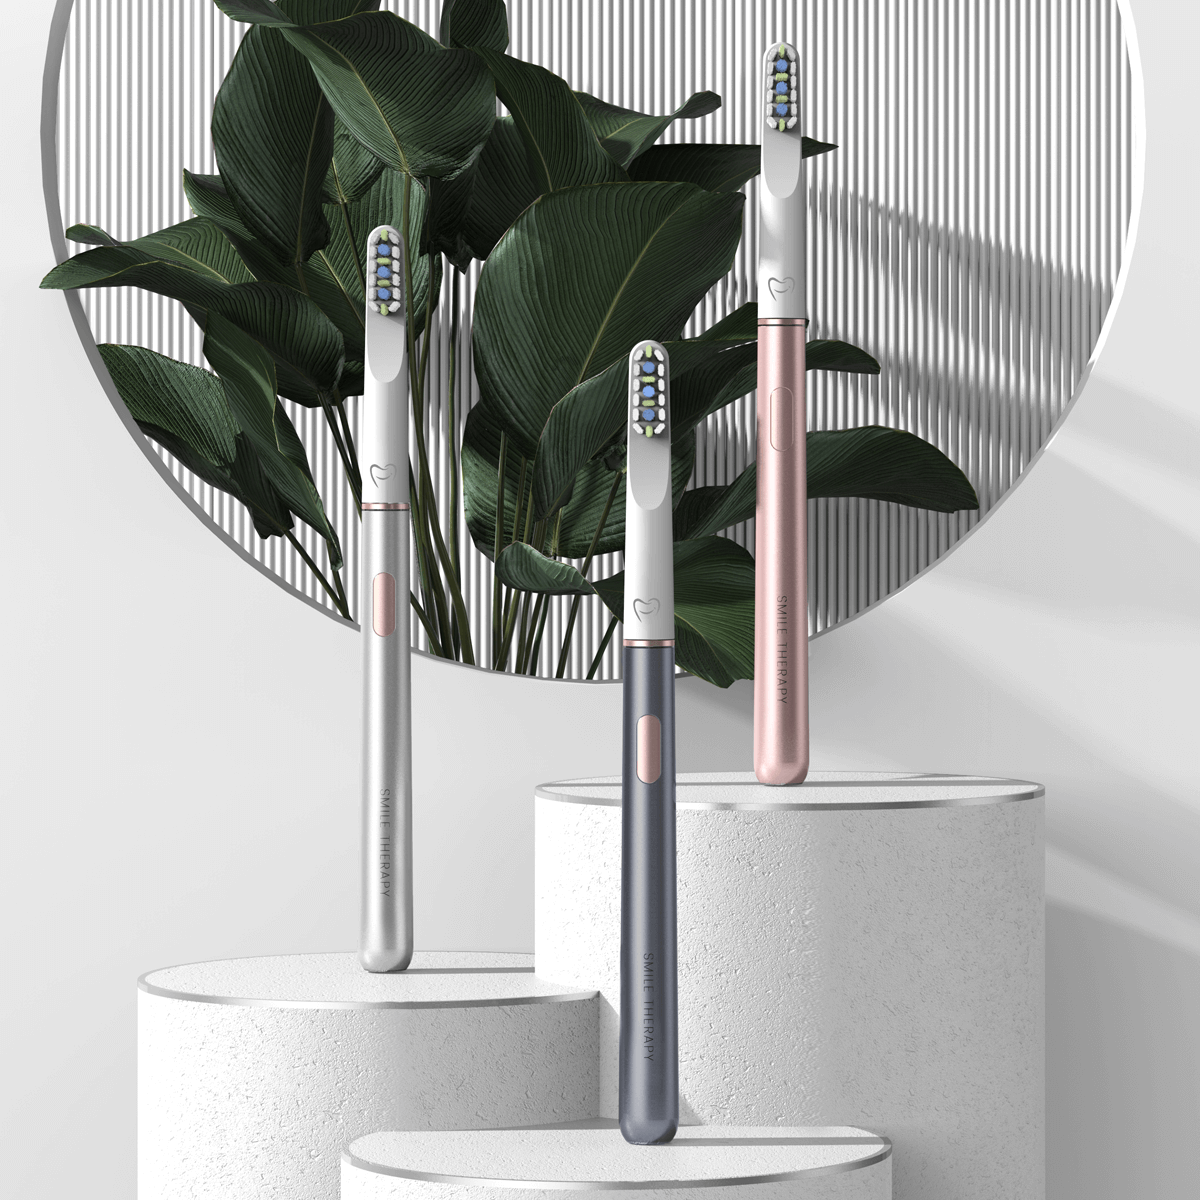 Air Advanced Electric Toothbrush 3-in-1